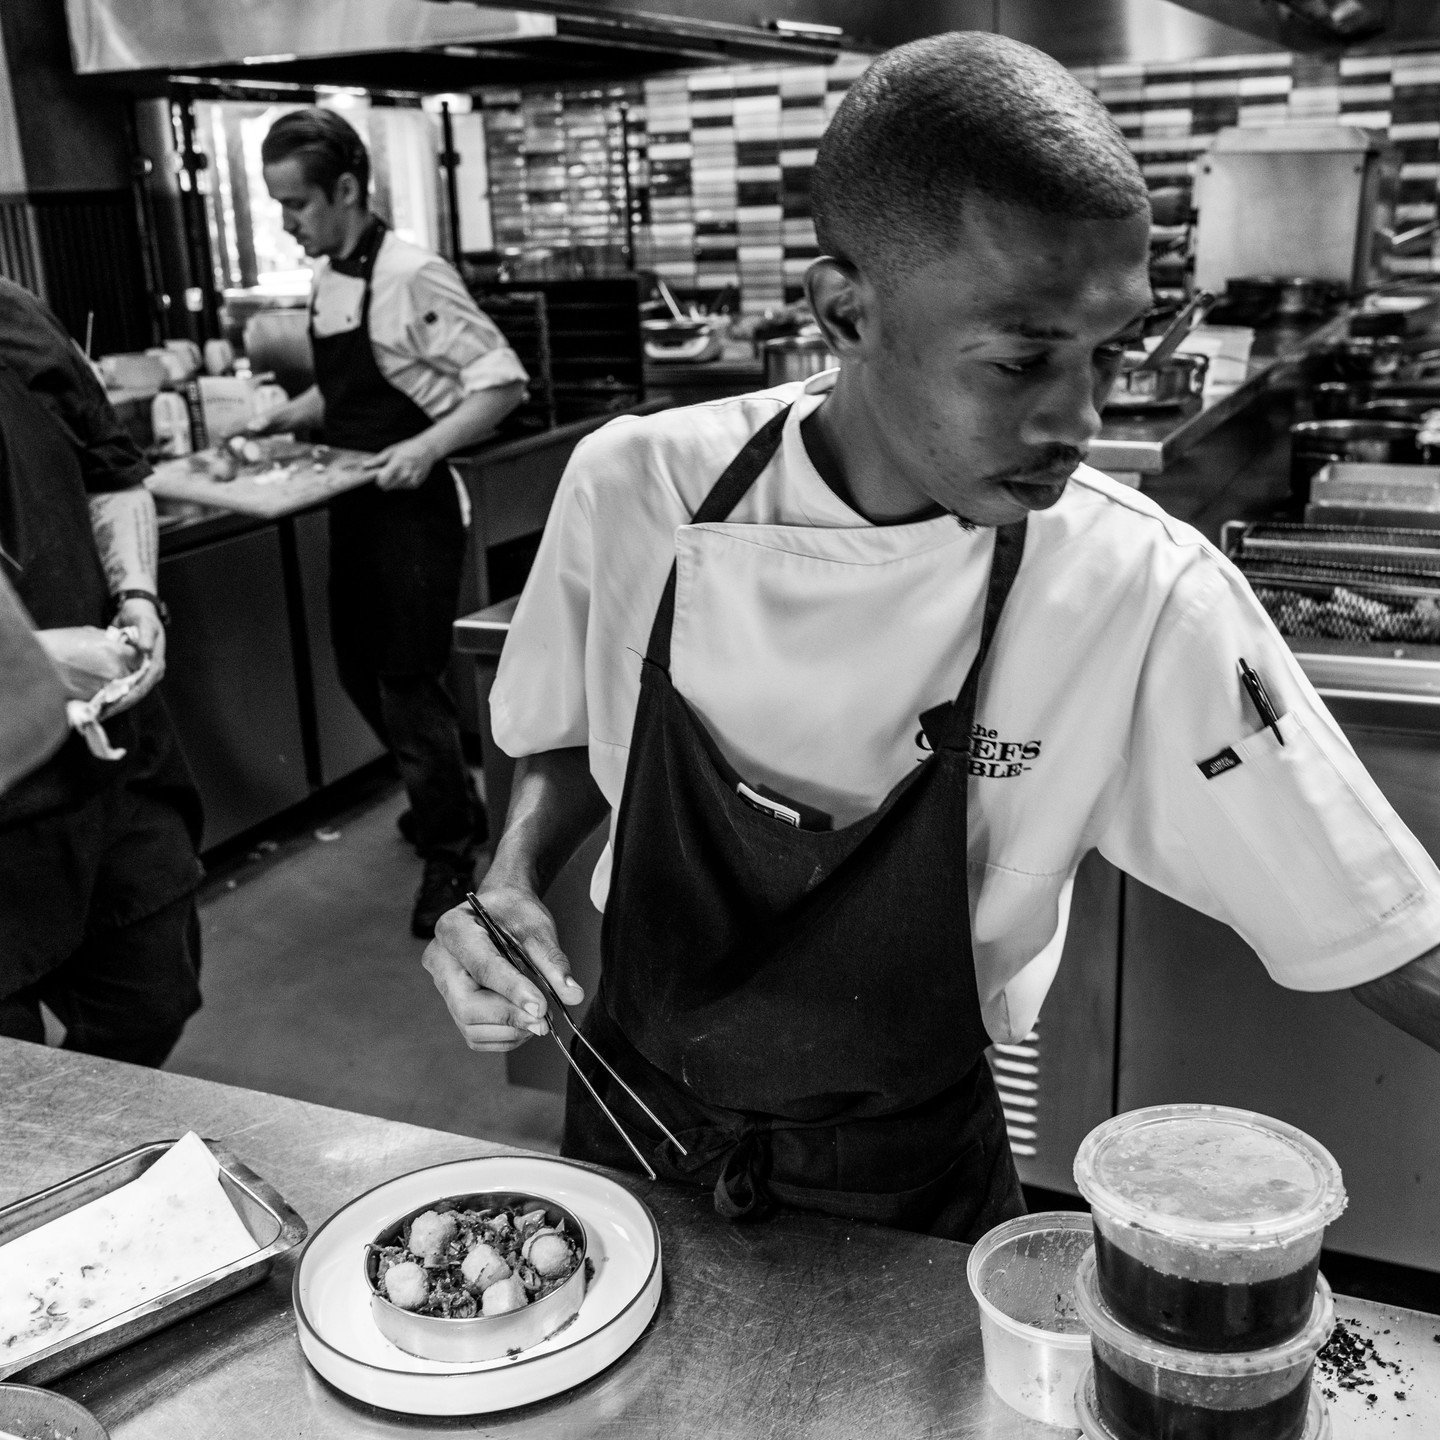 WEEKEND LOADING

You have made it to the end of April, time to treat yourselves to a dining experience at the Chefs' Table.

Book your table online (link in bio), email reception@thechefstable.co.za or phone 031 001 0200. 

@eatoutguide 
@jhp_gourmet